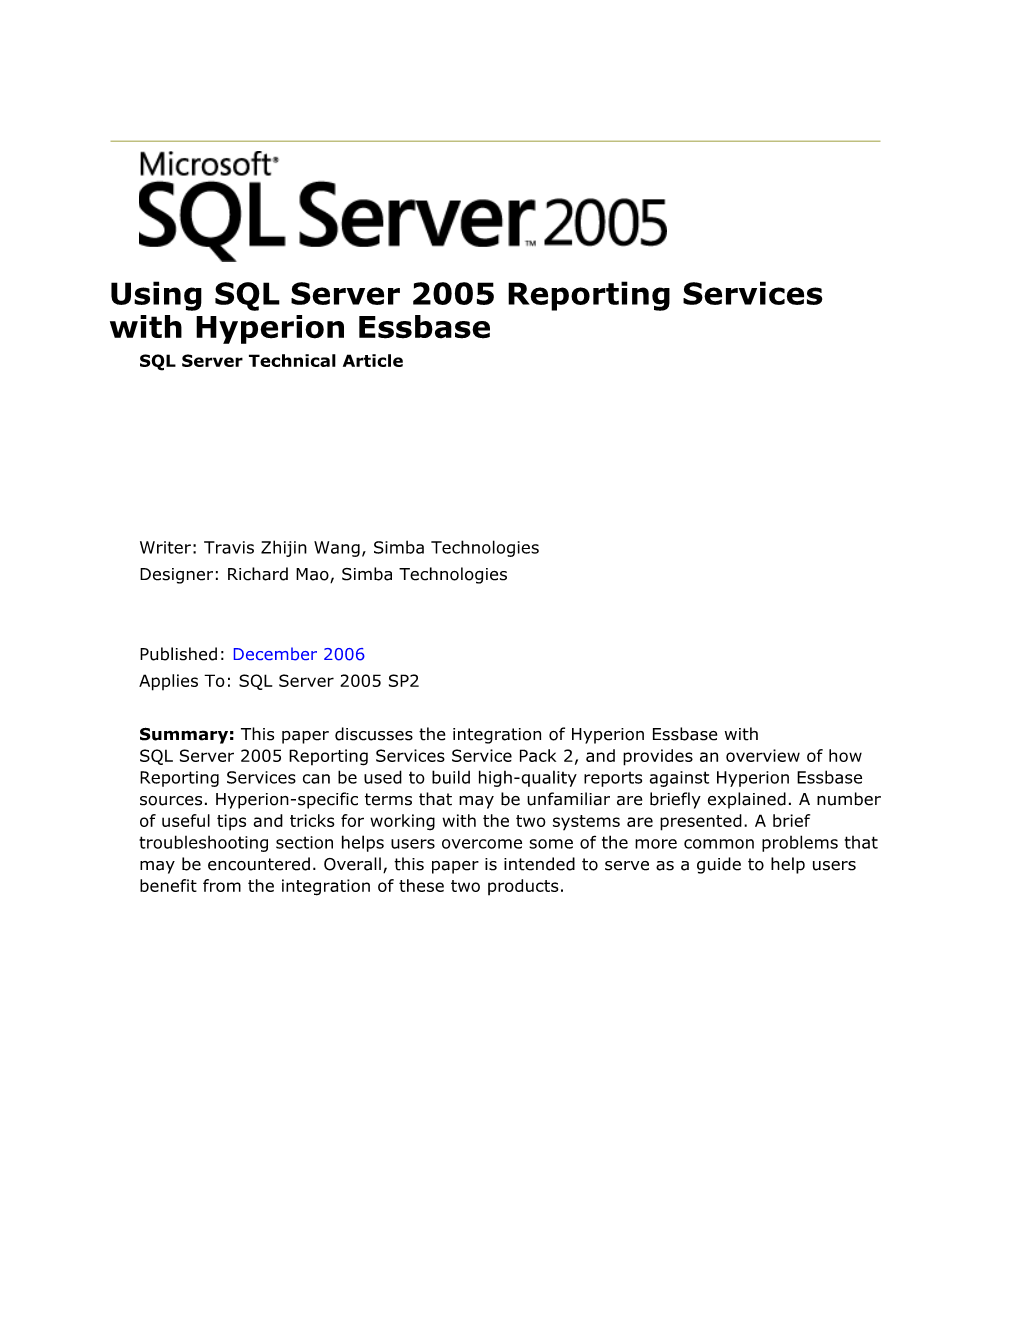 Using SQL Server 2005 Reporting Services with Hyperion Essbase